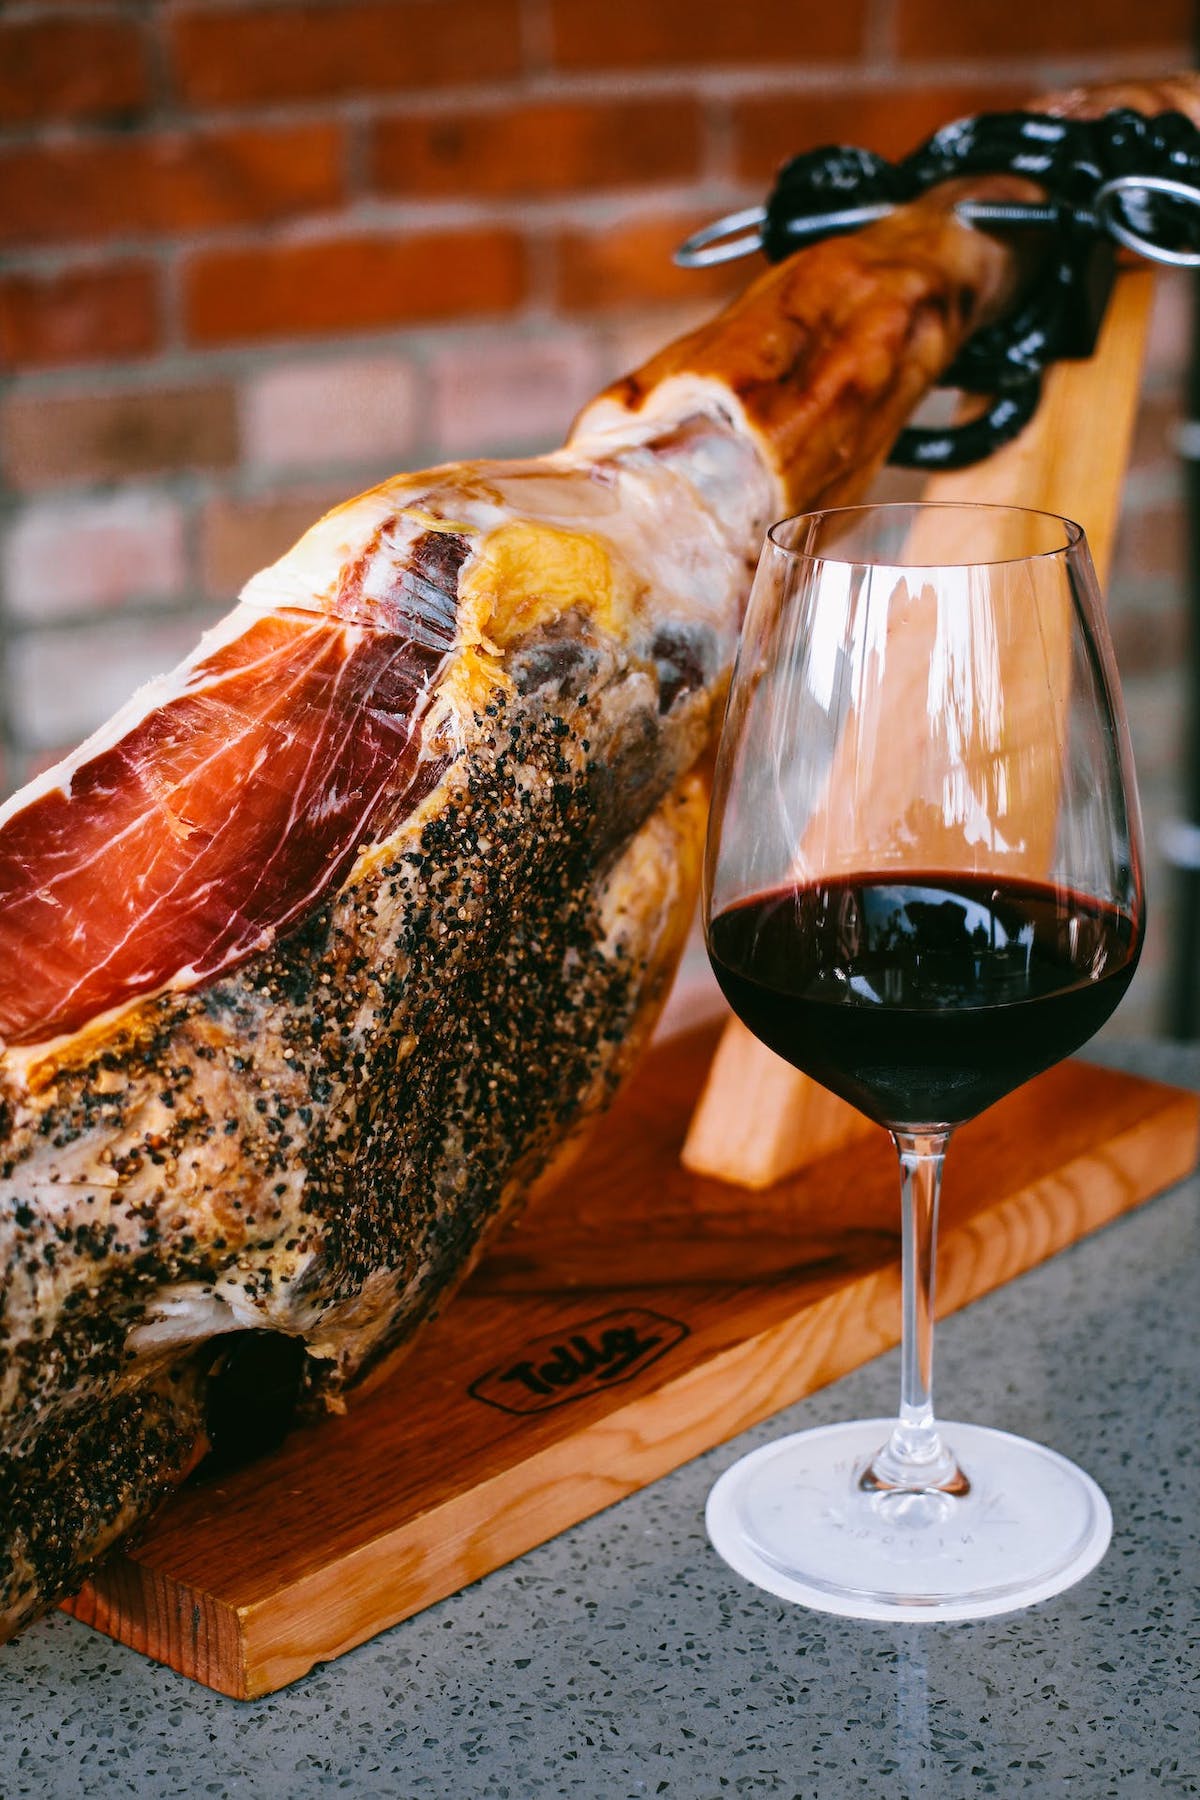 Buy jamón ibérico in Madrid and pair it with a glass of wine